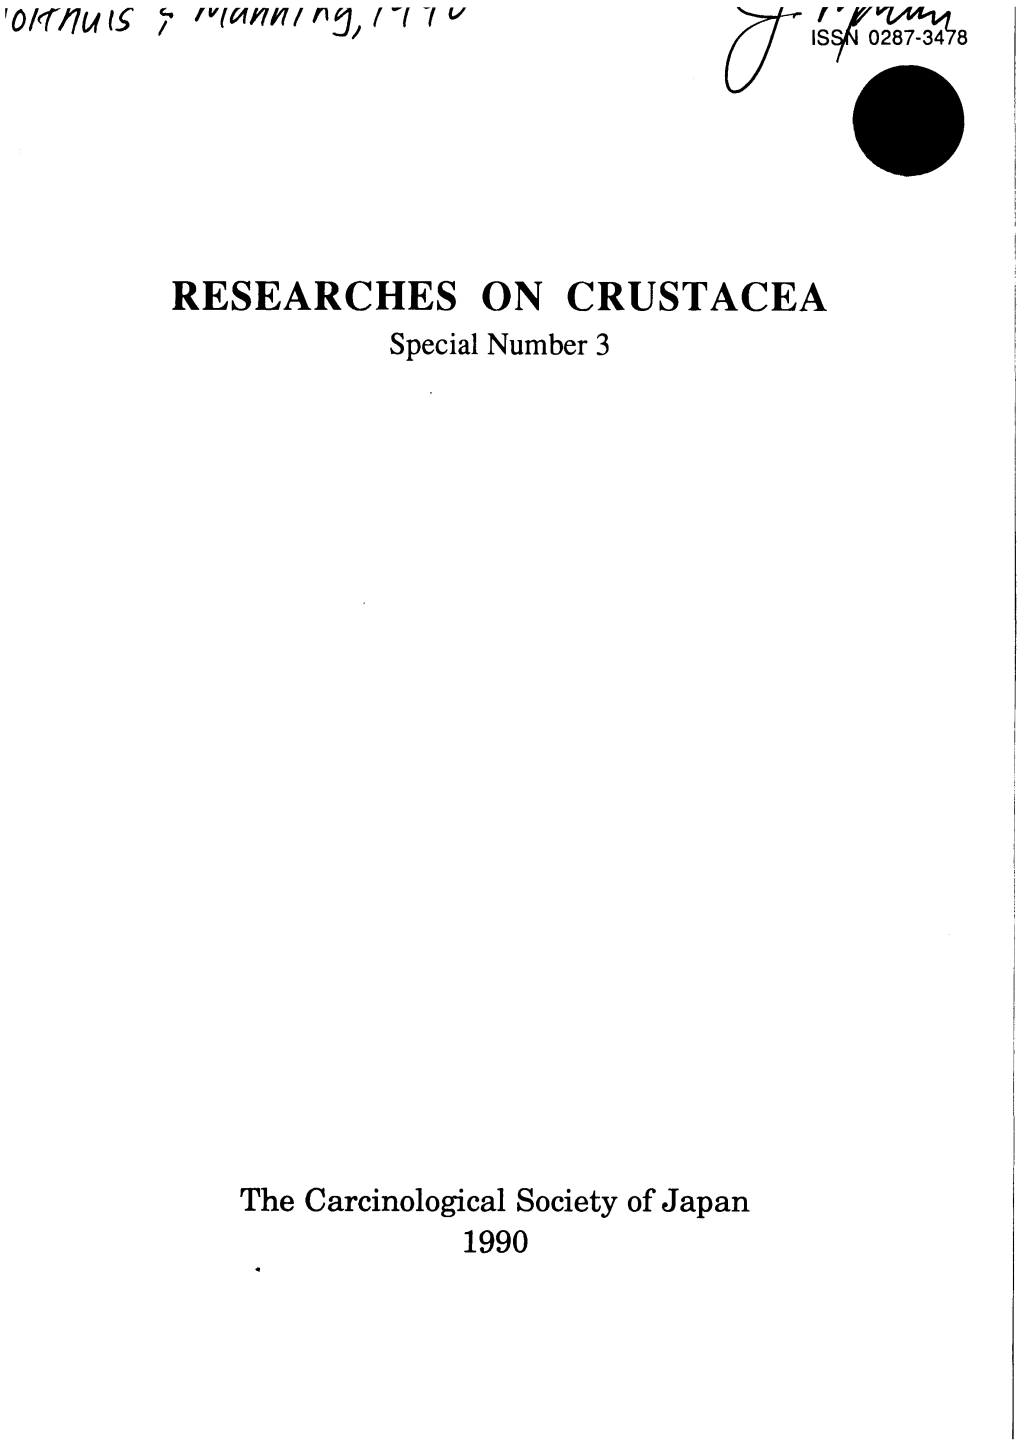 RESEARCHES on CRUSTACEA Special Number 3